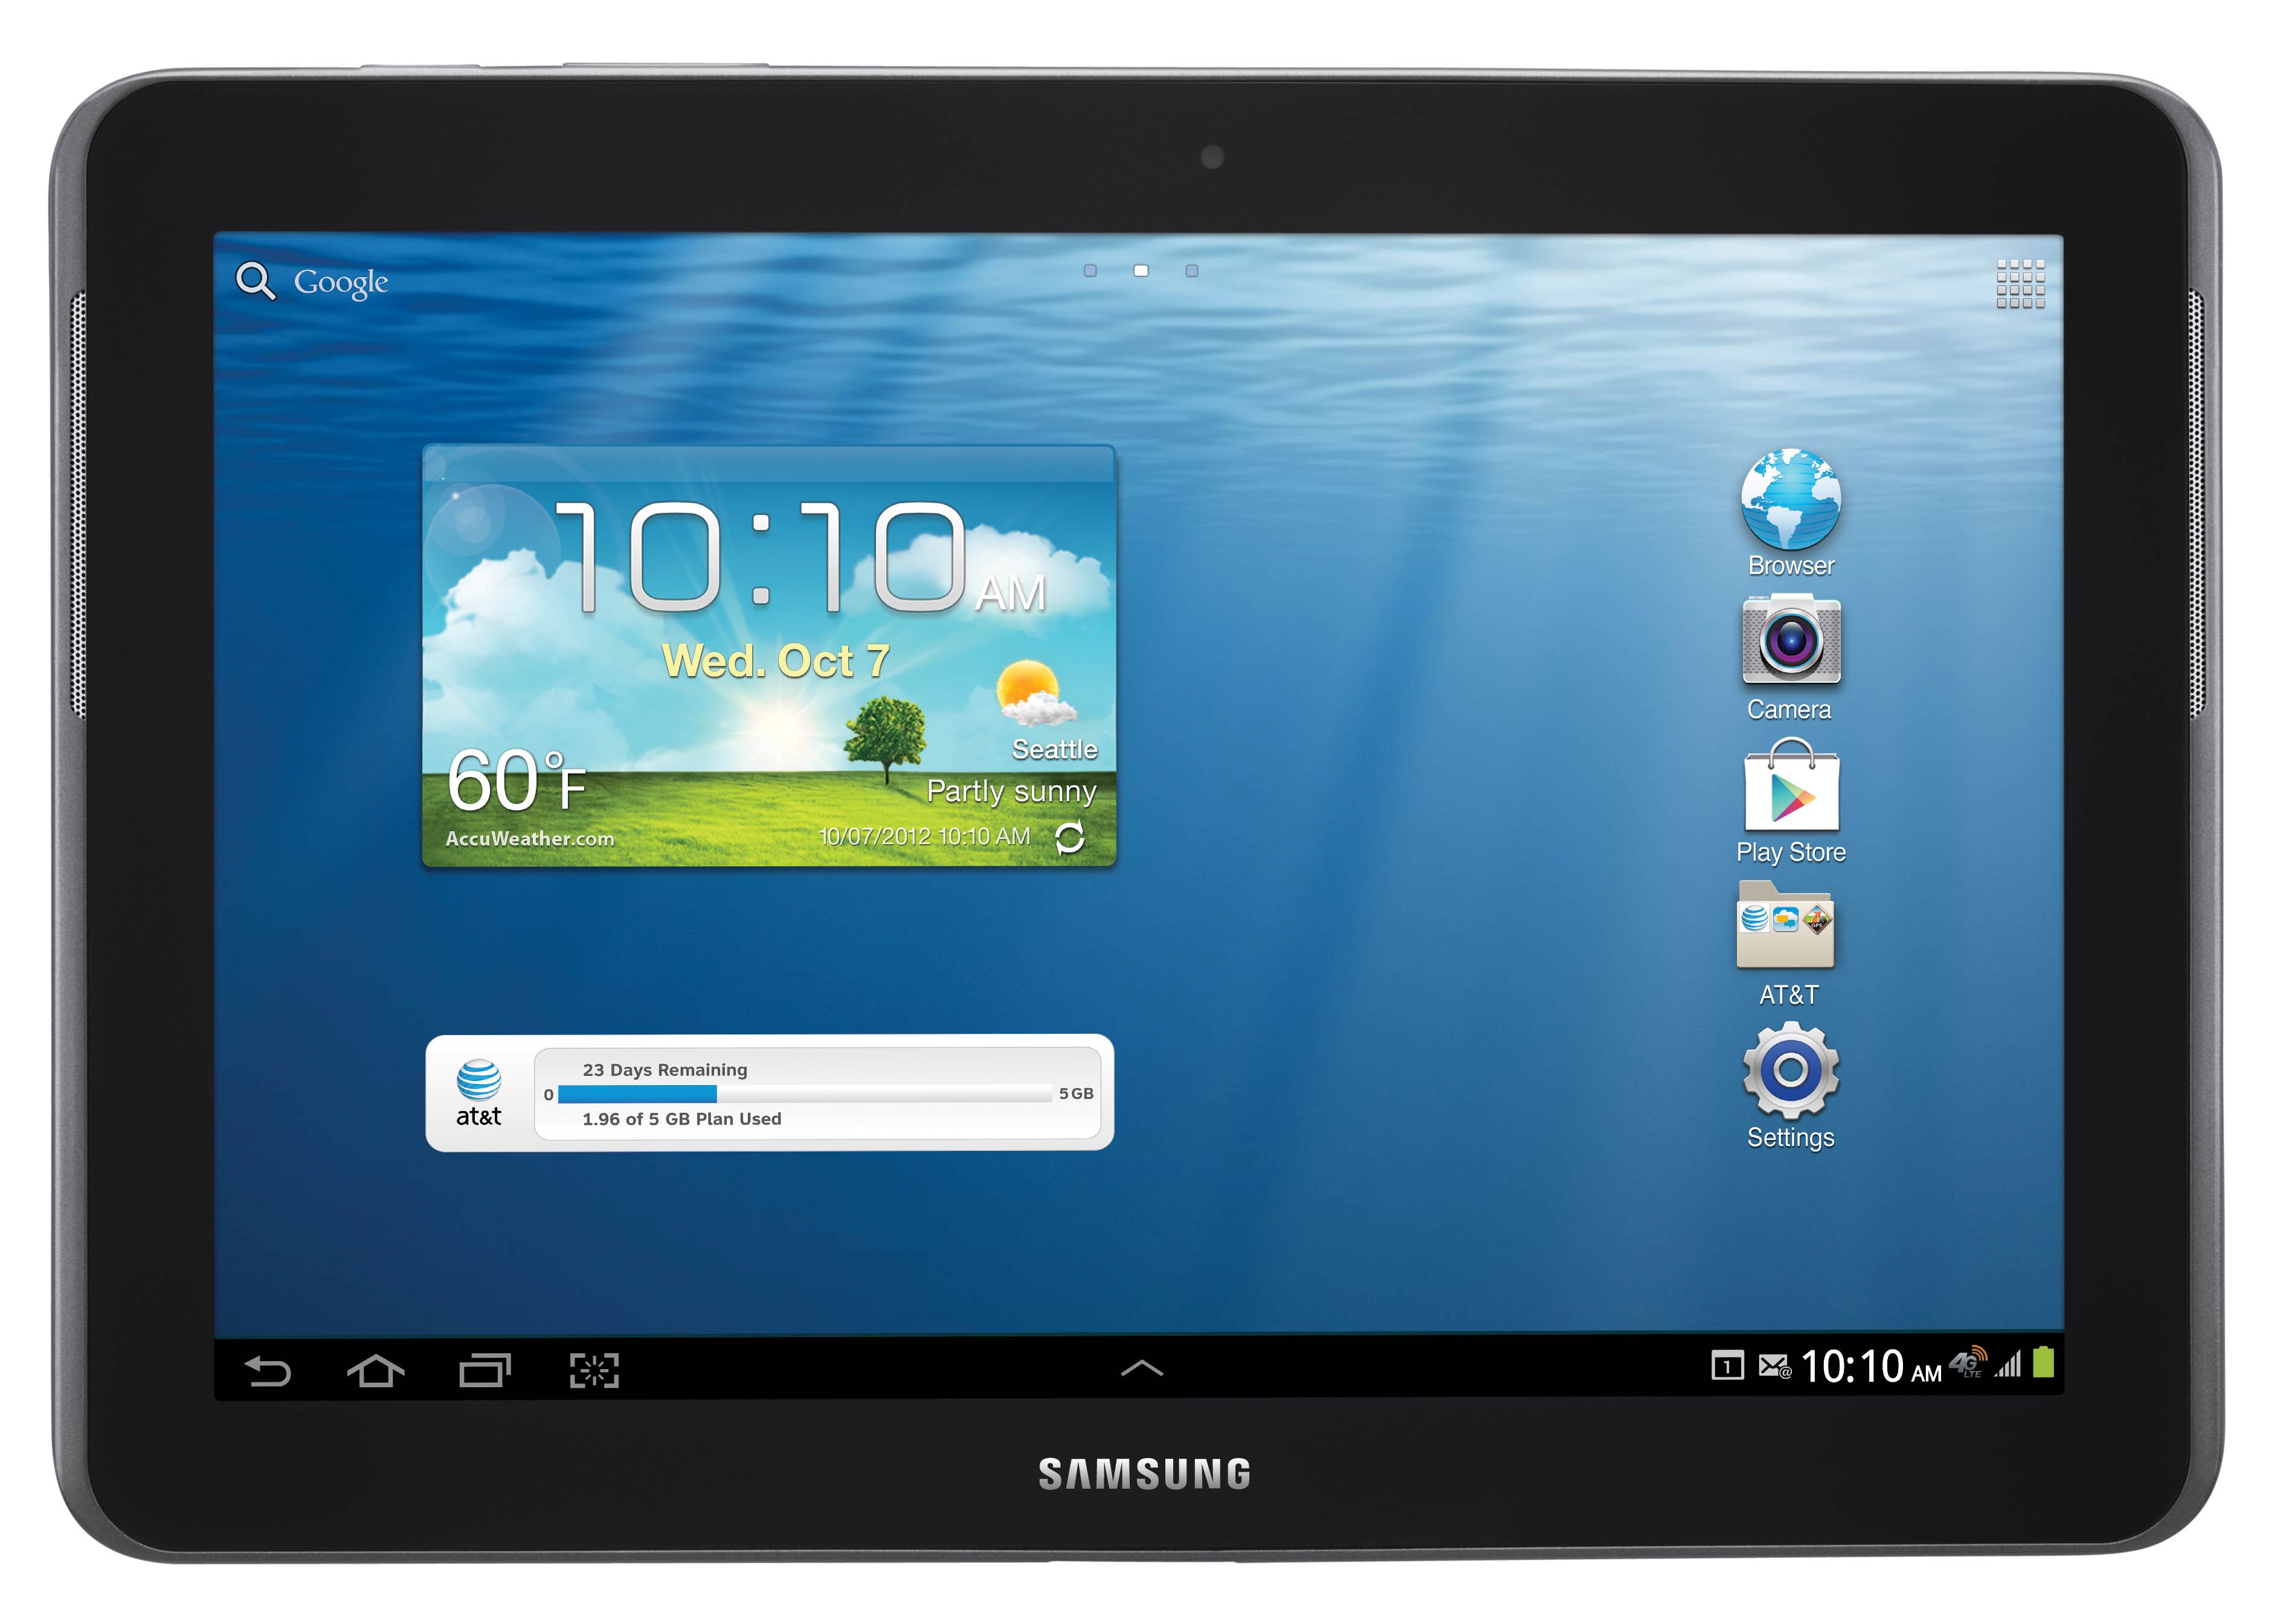 Samsung Tablet Pictures 3779x2688